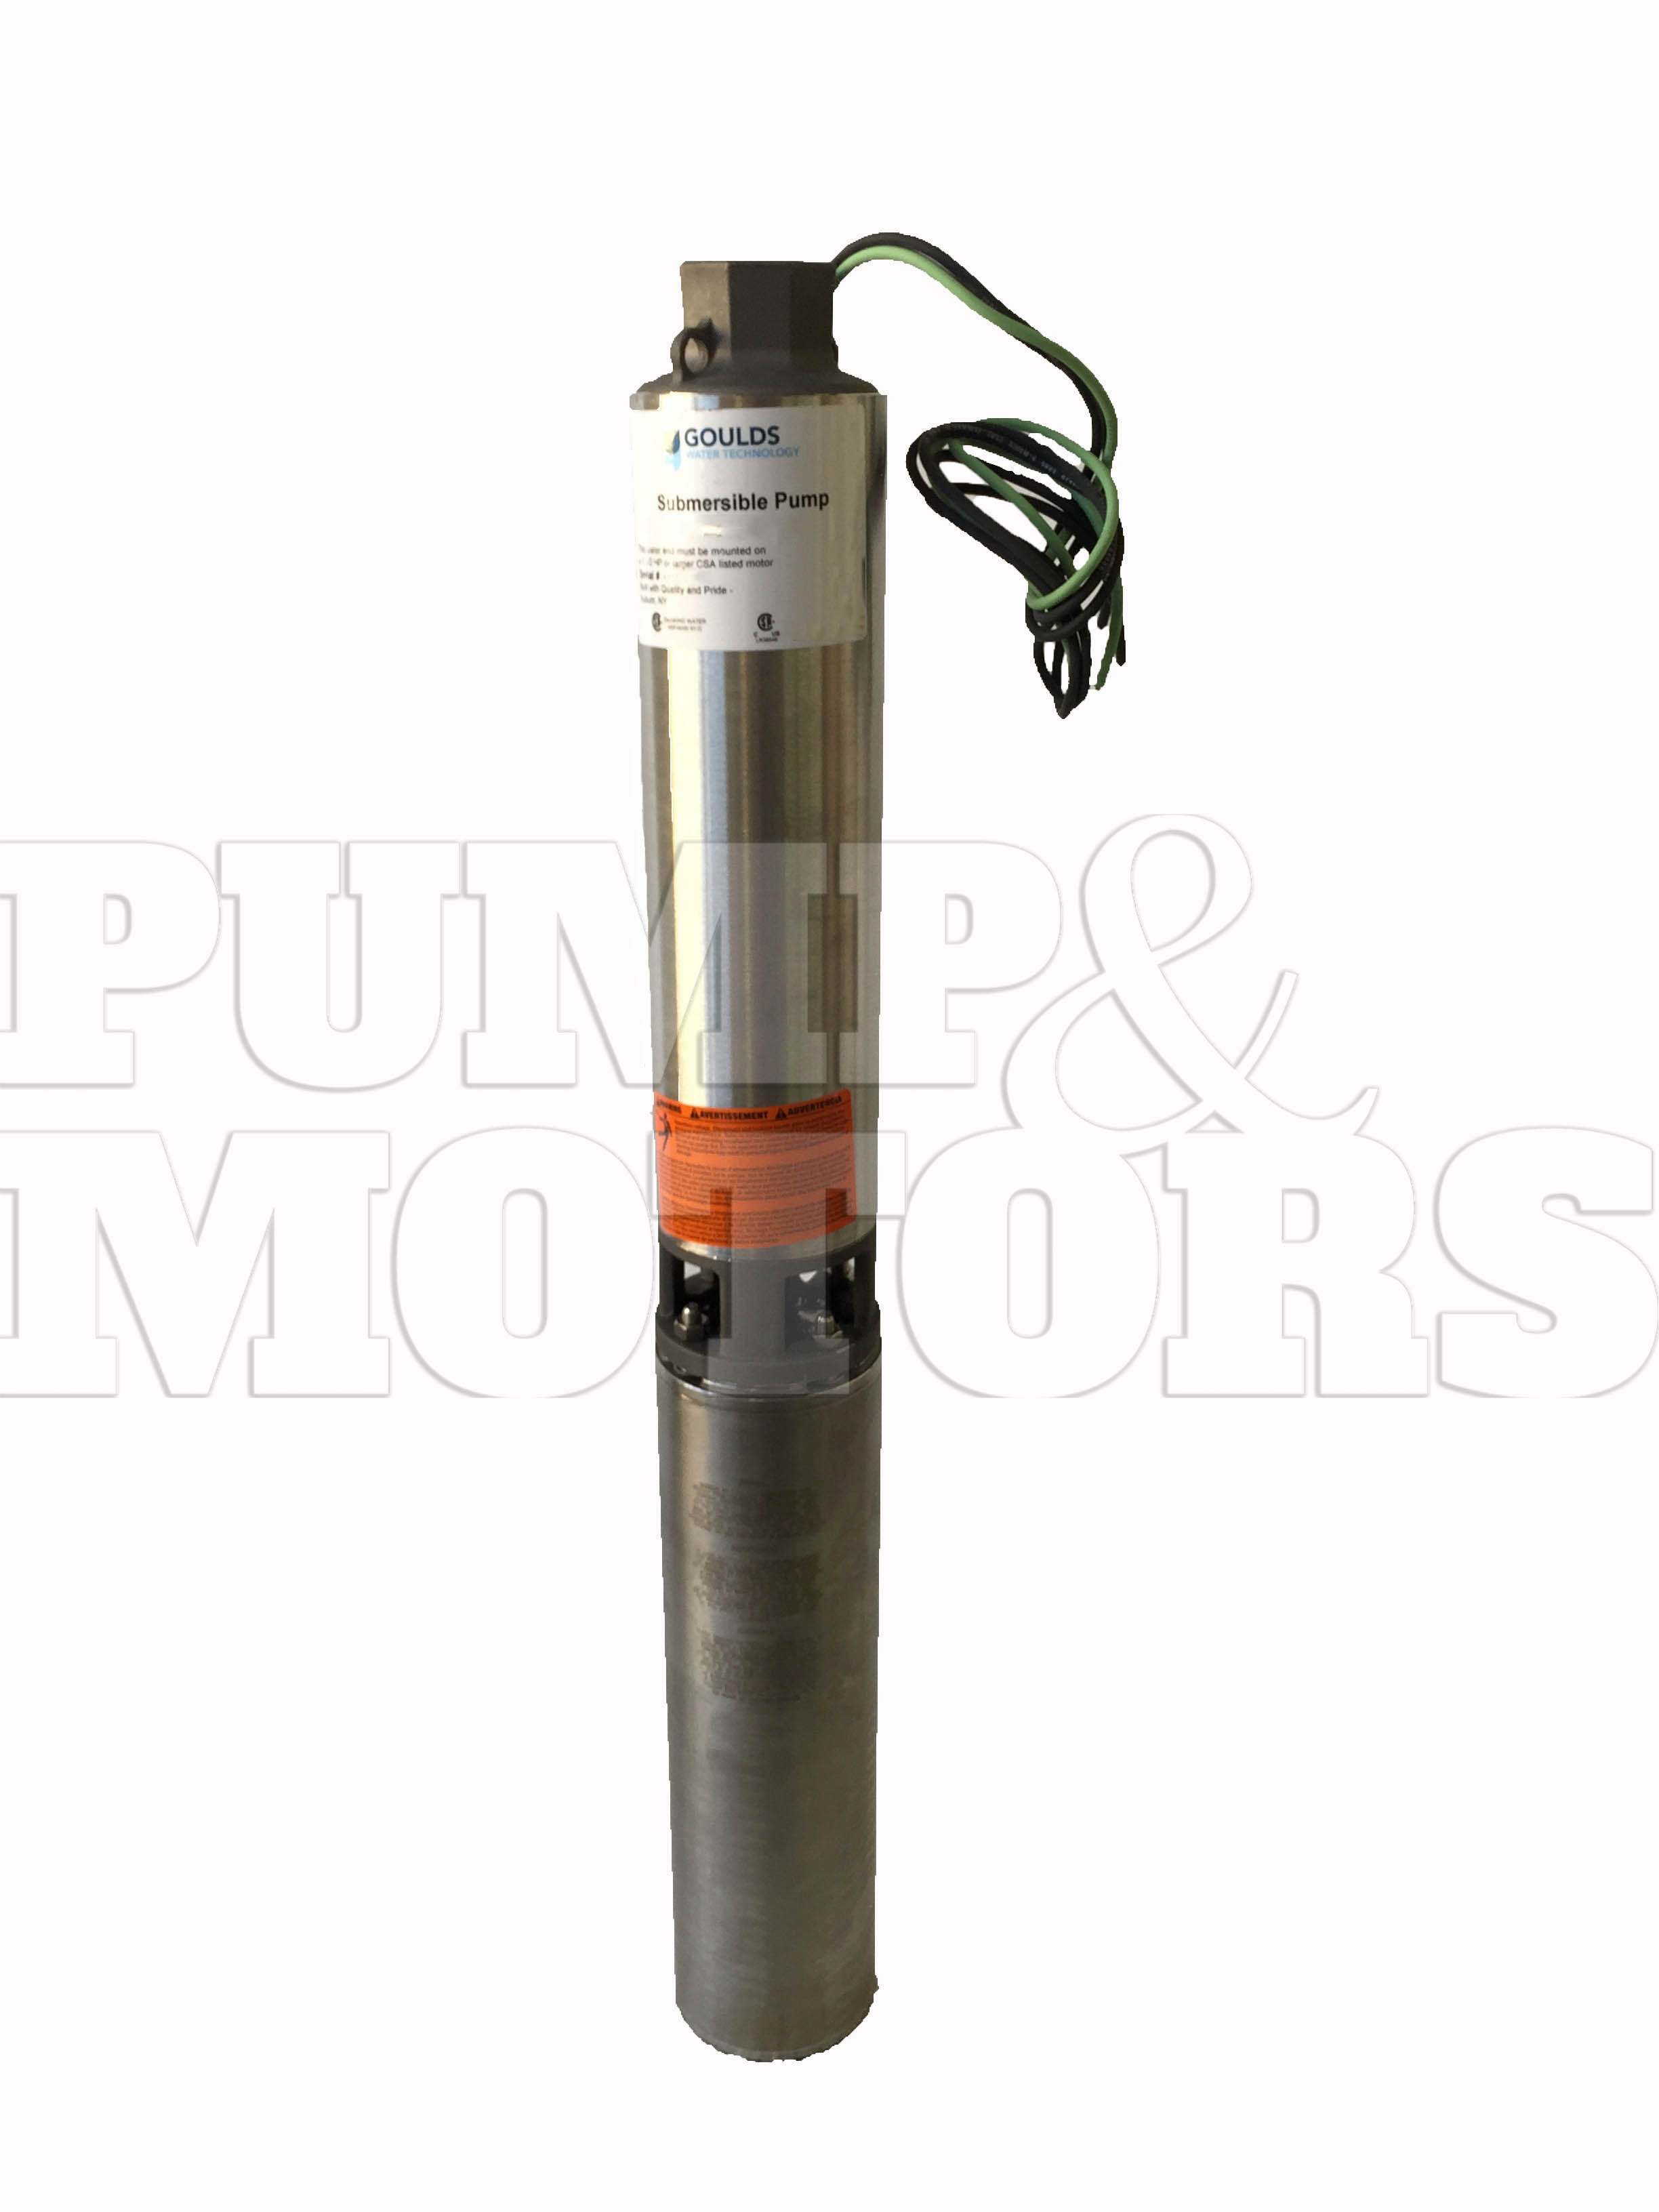 Goulds 18LS07422C 3/4HP 230V Submersible Water Well Pump 18GPM